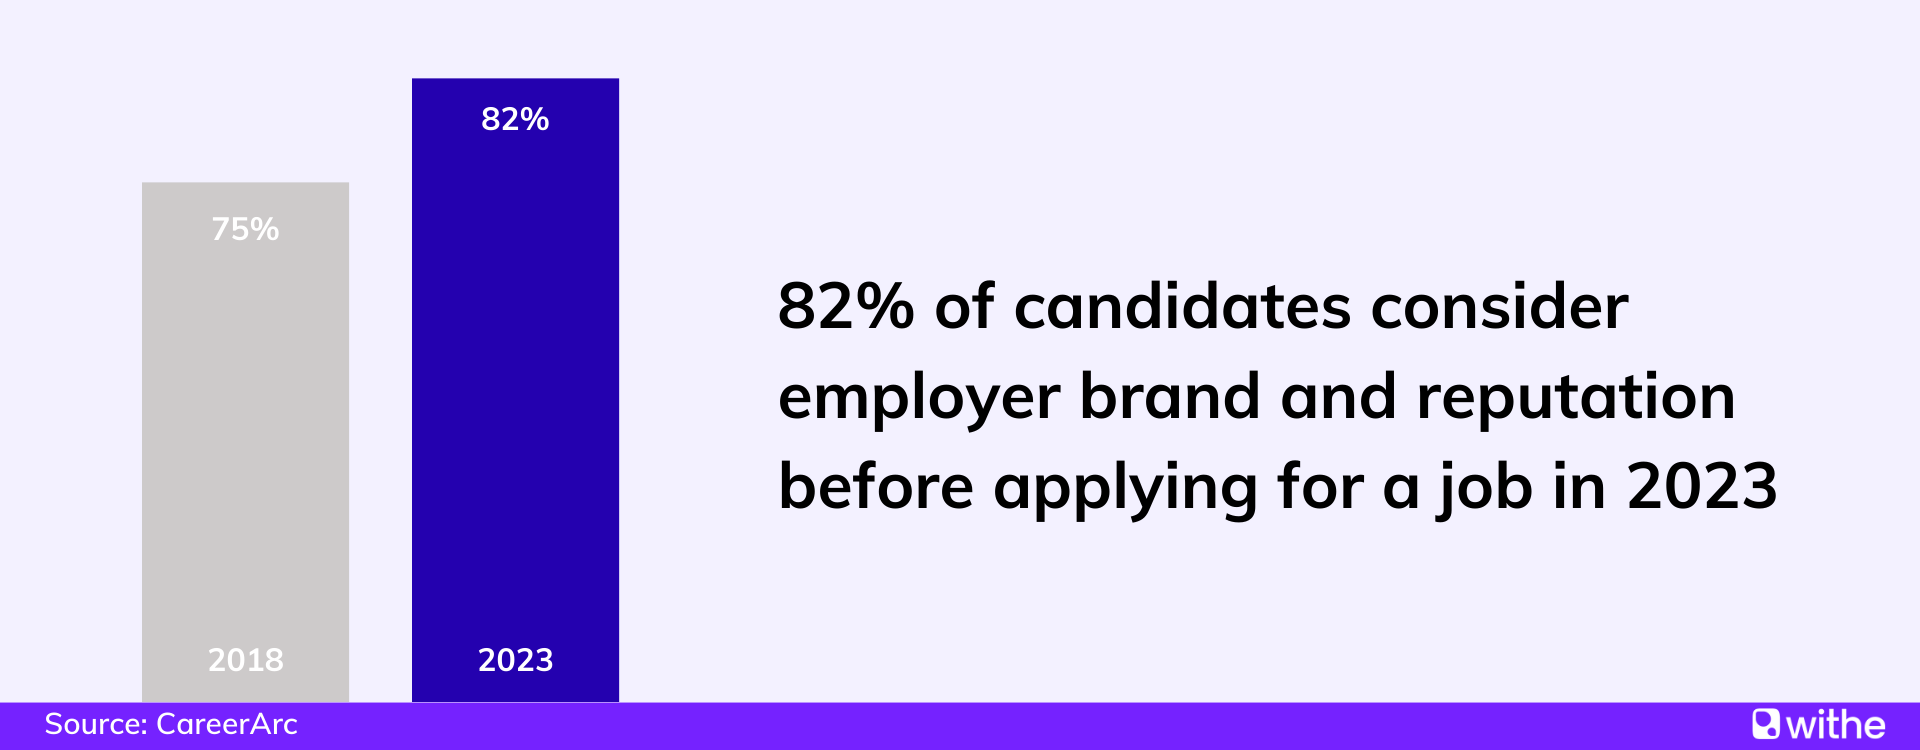 Employer brand statistics - 82% of candidates consider employer brand and reputation before applying for a job in 2023